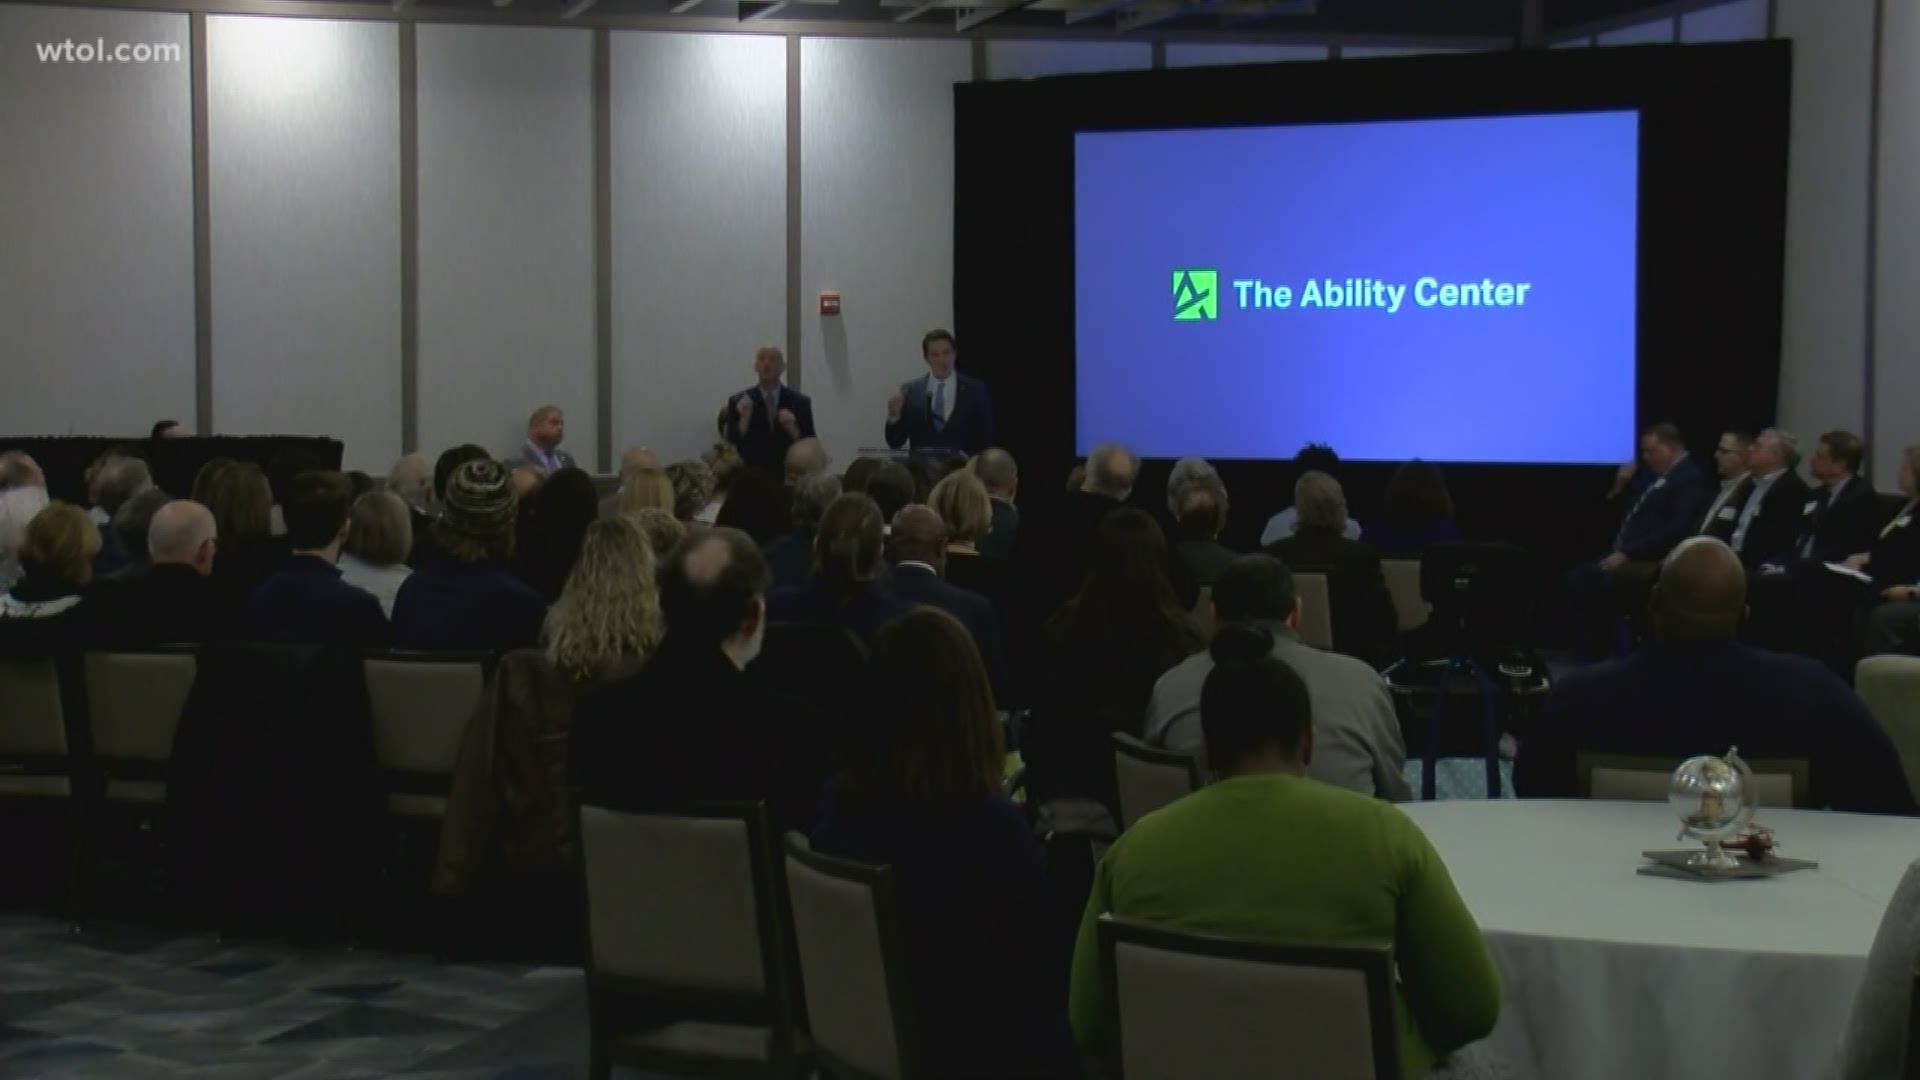 The Ability Center is a local nonprofit serving those with disabilities in northwest Ohio. On Thursday, they unveiled new partnerships and yearly activities.